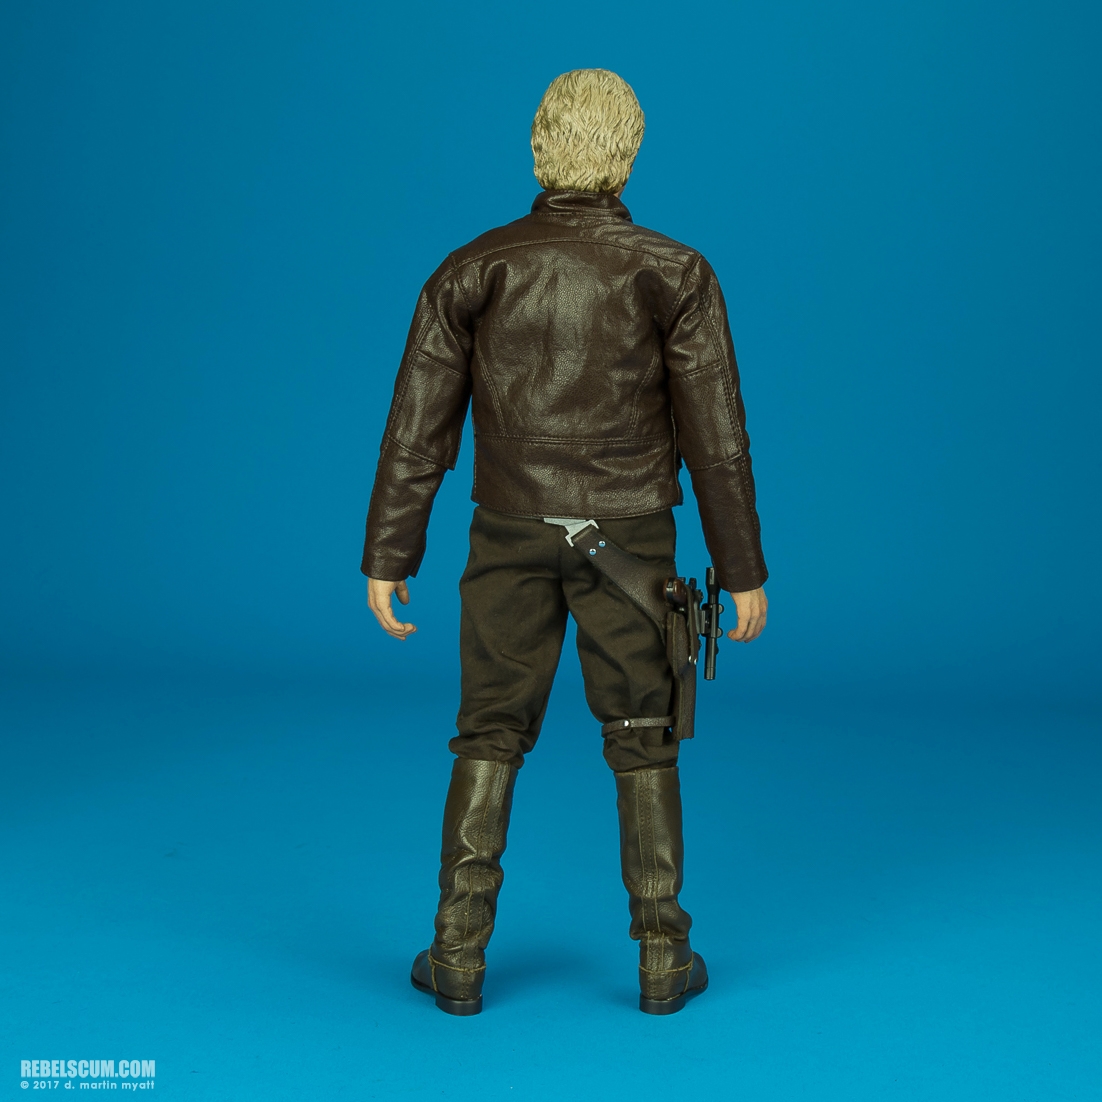 MMS376-Han-Solo-Chewbacca-The-Force-Awakens-Hot-Toys-004.jpg